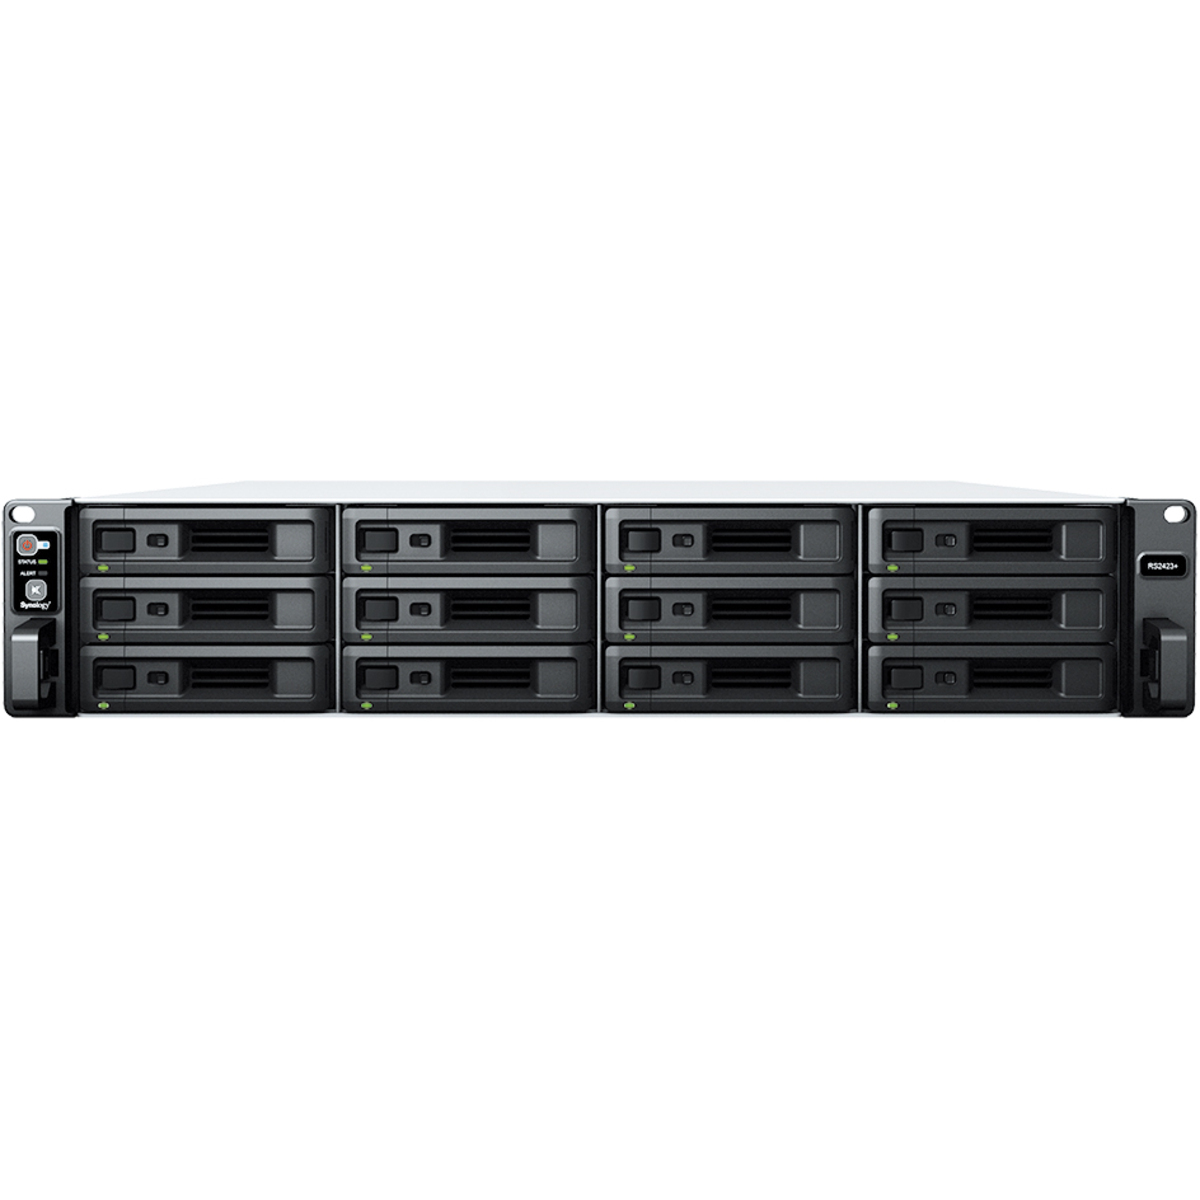 Synology RackStation RS2423RP+ 24tb 12-Bay RackMount Multimedia / Power User / Business NAS - Network Attached Storage Device 12x2tb Western Digital Red SA500 WDS200T1R0A 2.5 560/530MB/s SATA 6Gb/s SSD NAS Class Drives Installed - Burn-In Tested - FREE RAM UPGRADE RackStation RS2423RP+